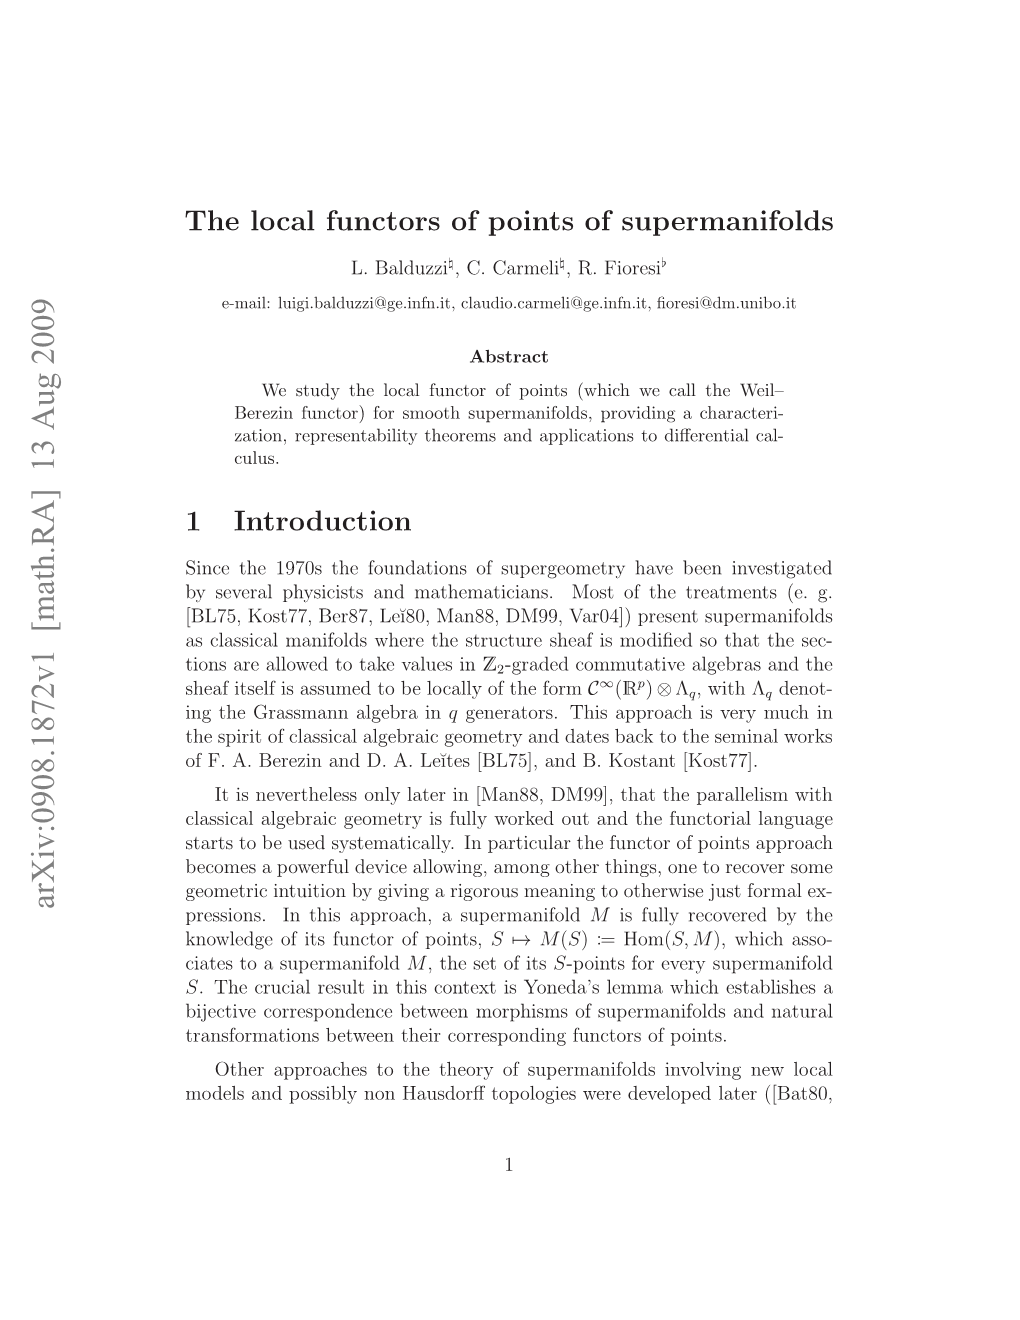 The Local Functors of Points of Supermanifolds